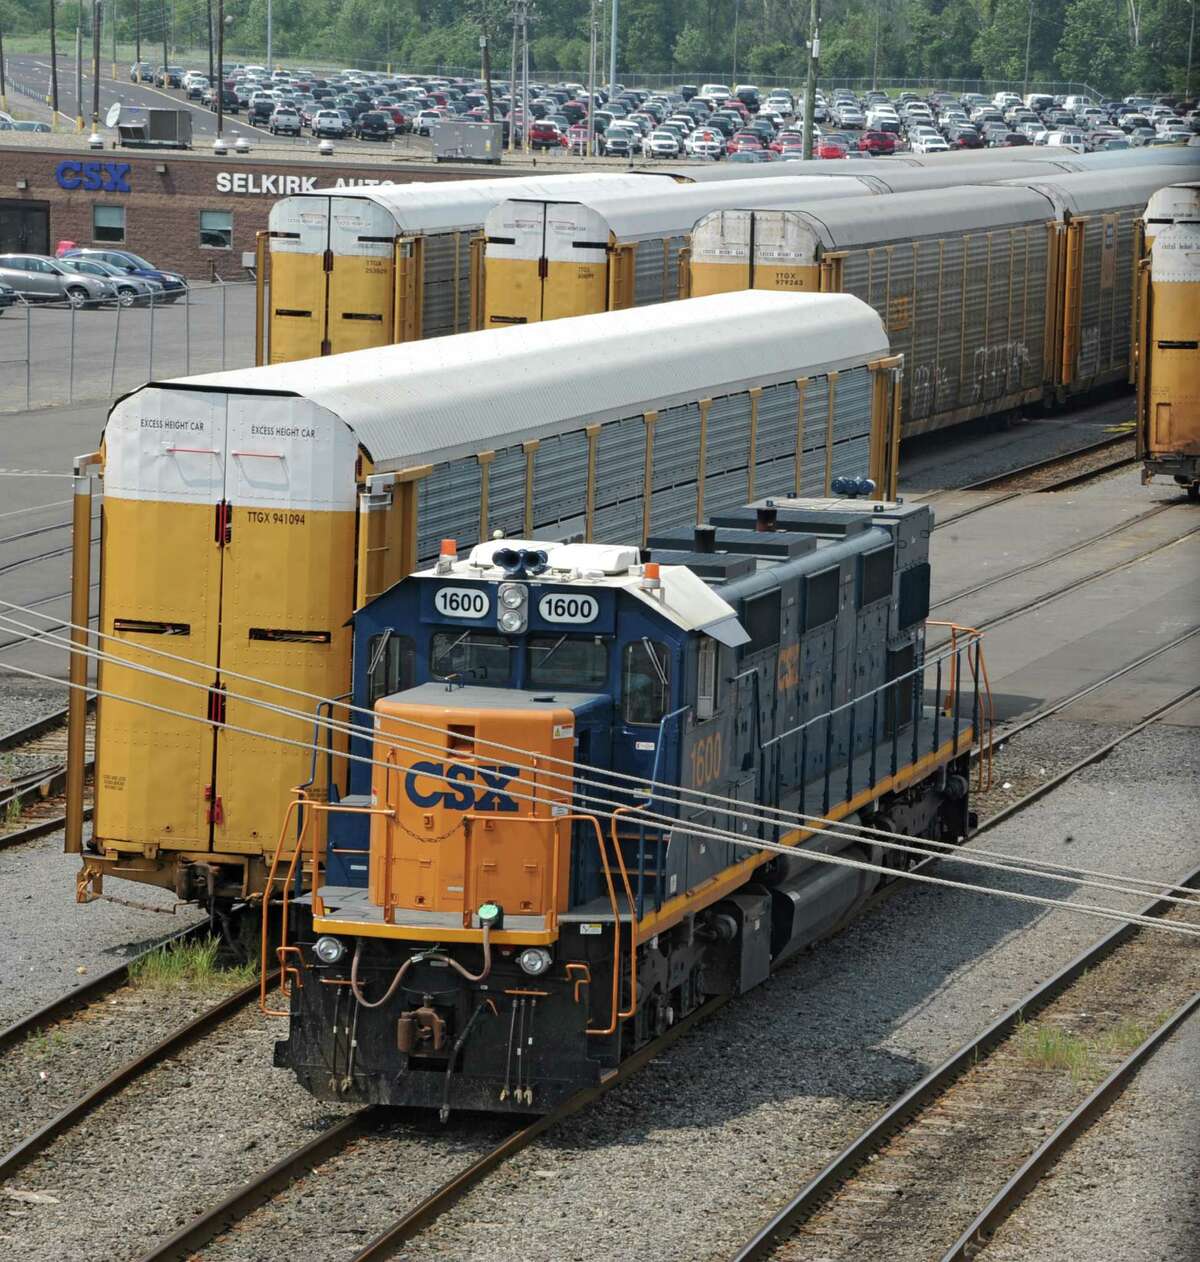 Trains and rail cars are seen at the CSX rail yard on Wednesday, July 23, 2014 in Selkirk N.Y. (Lori Van Buren / Times Union)